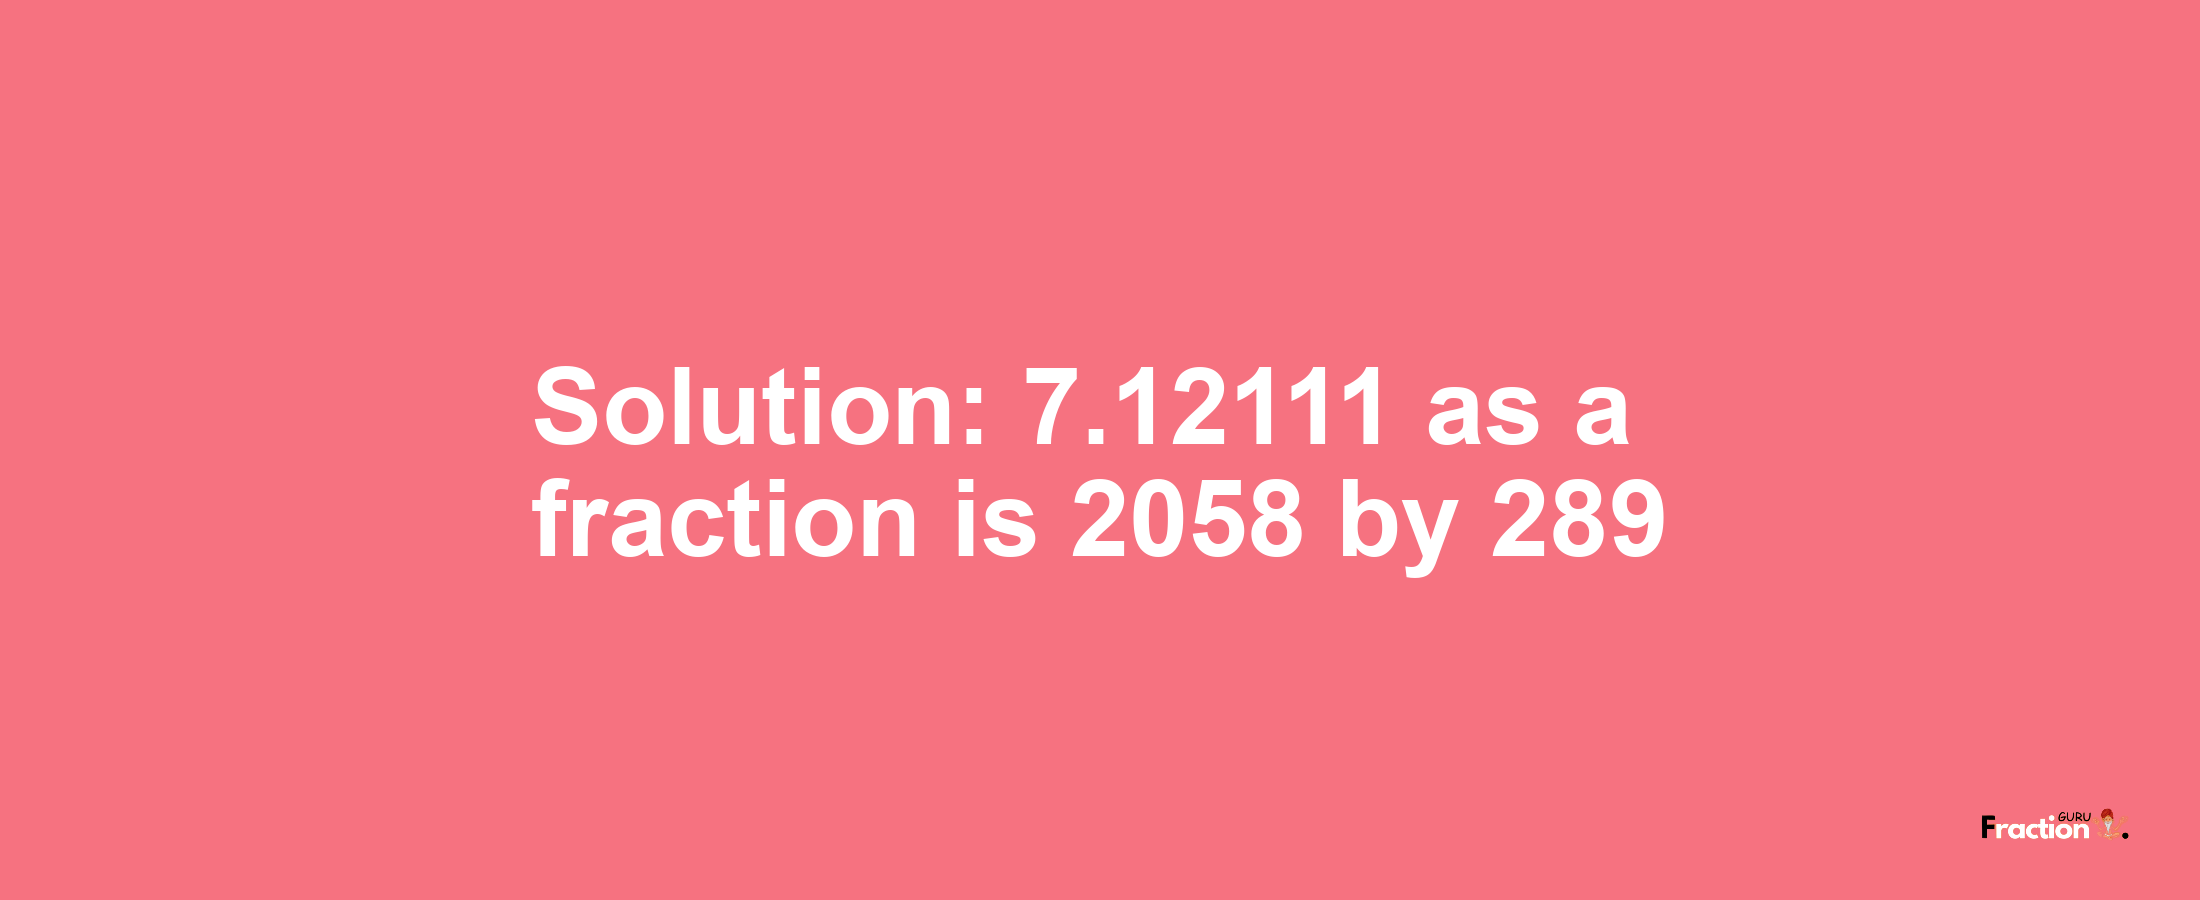 Solution:7.12111 as a fraction is 2058/289